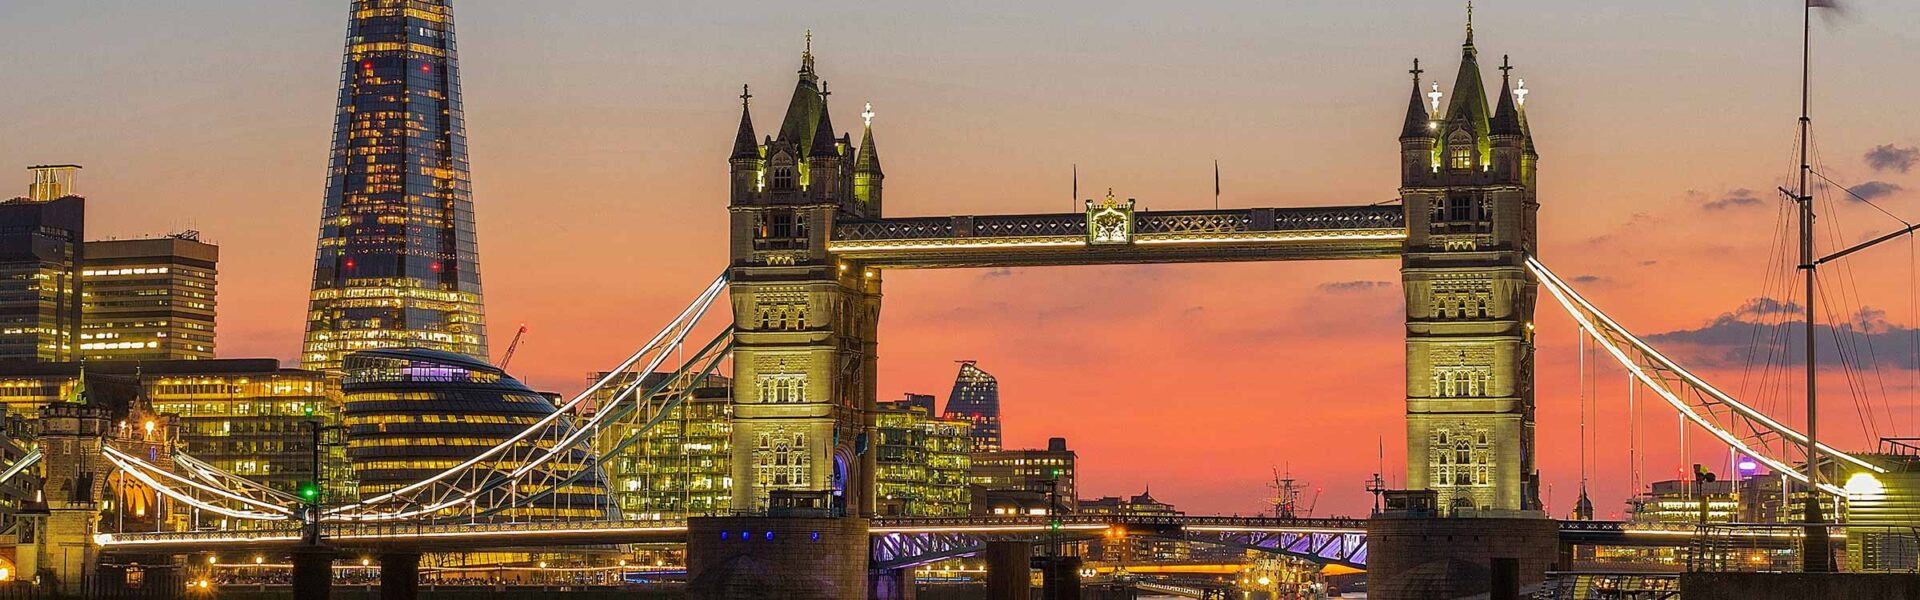 The Tower Bridge in London at sunset.